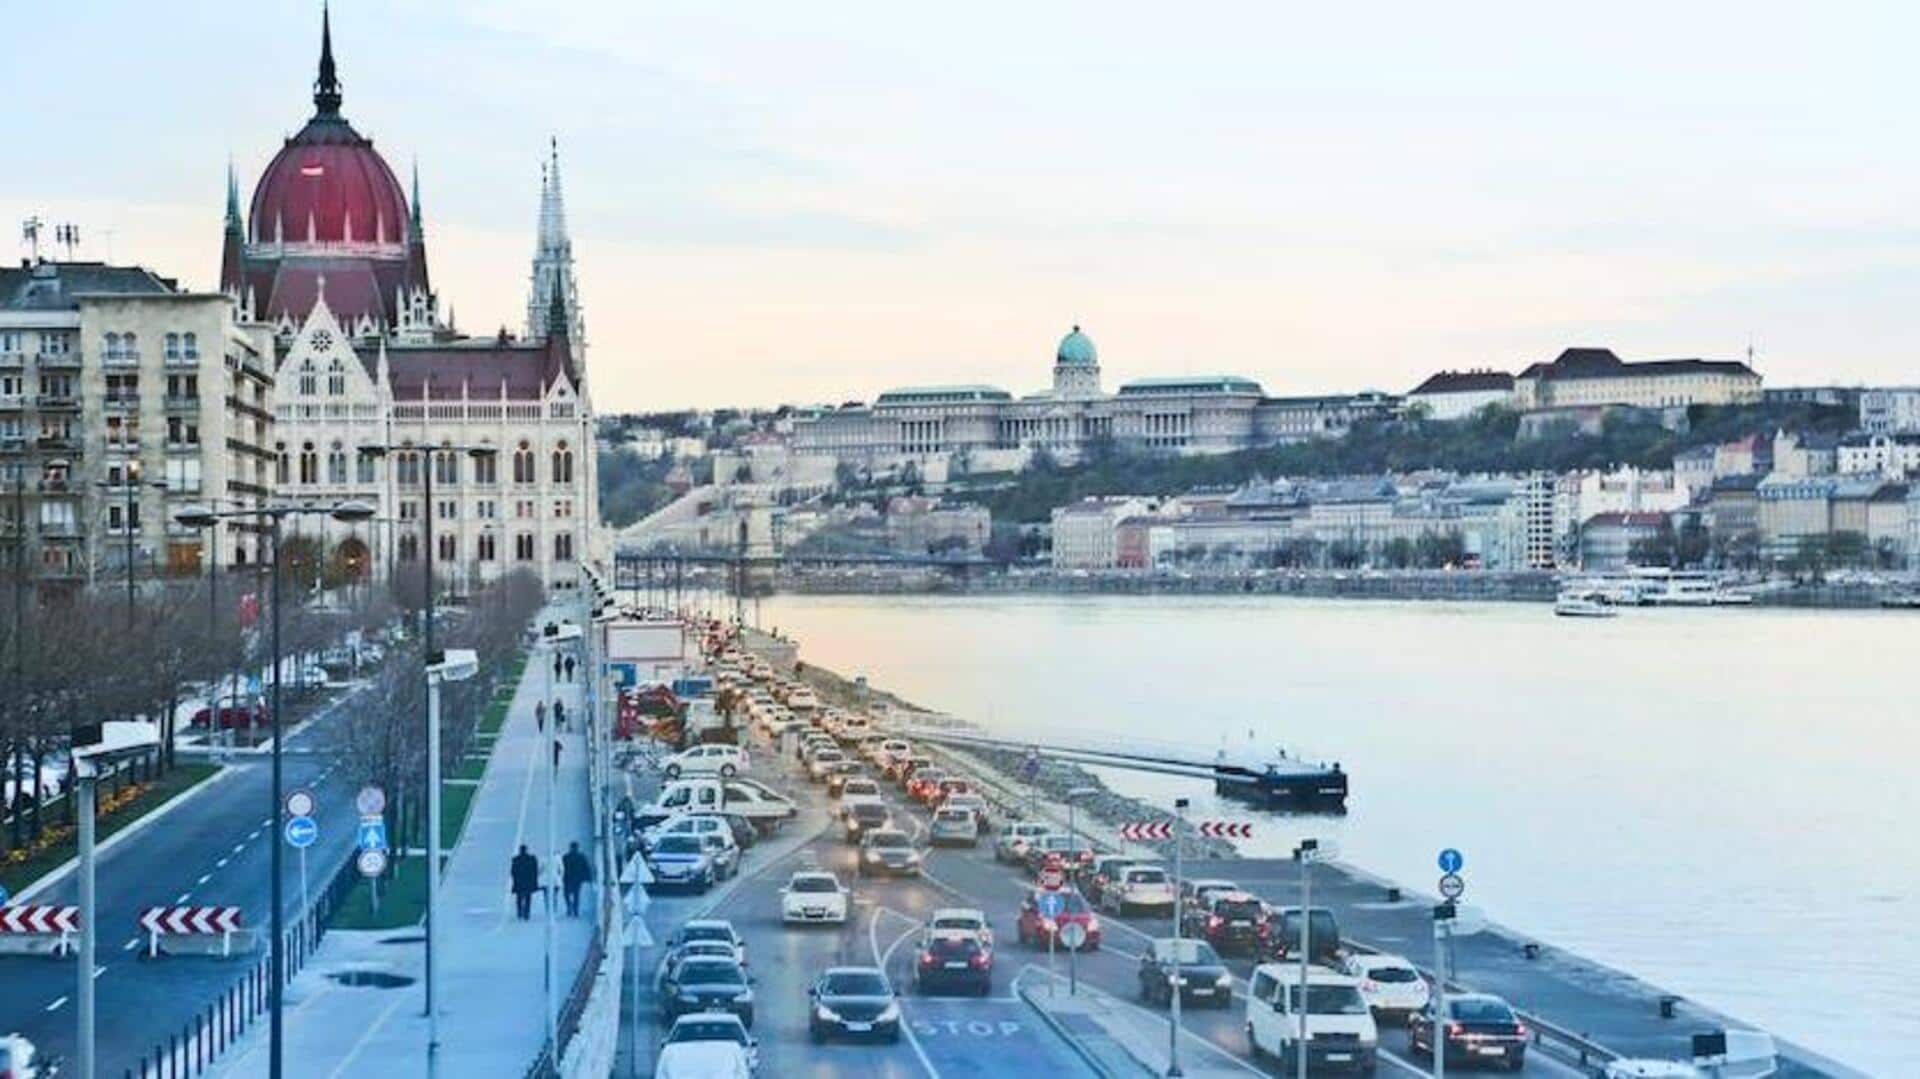 Fun and unusual things to do in Hungary